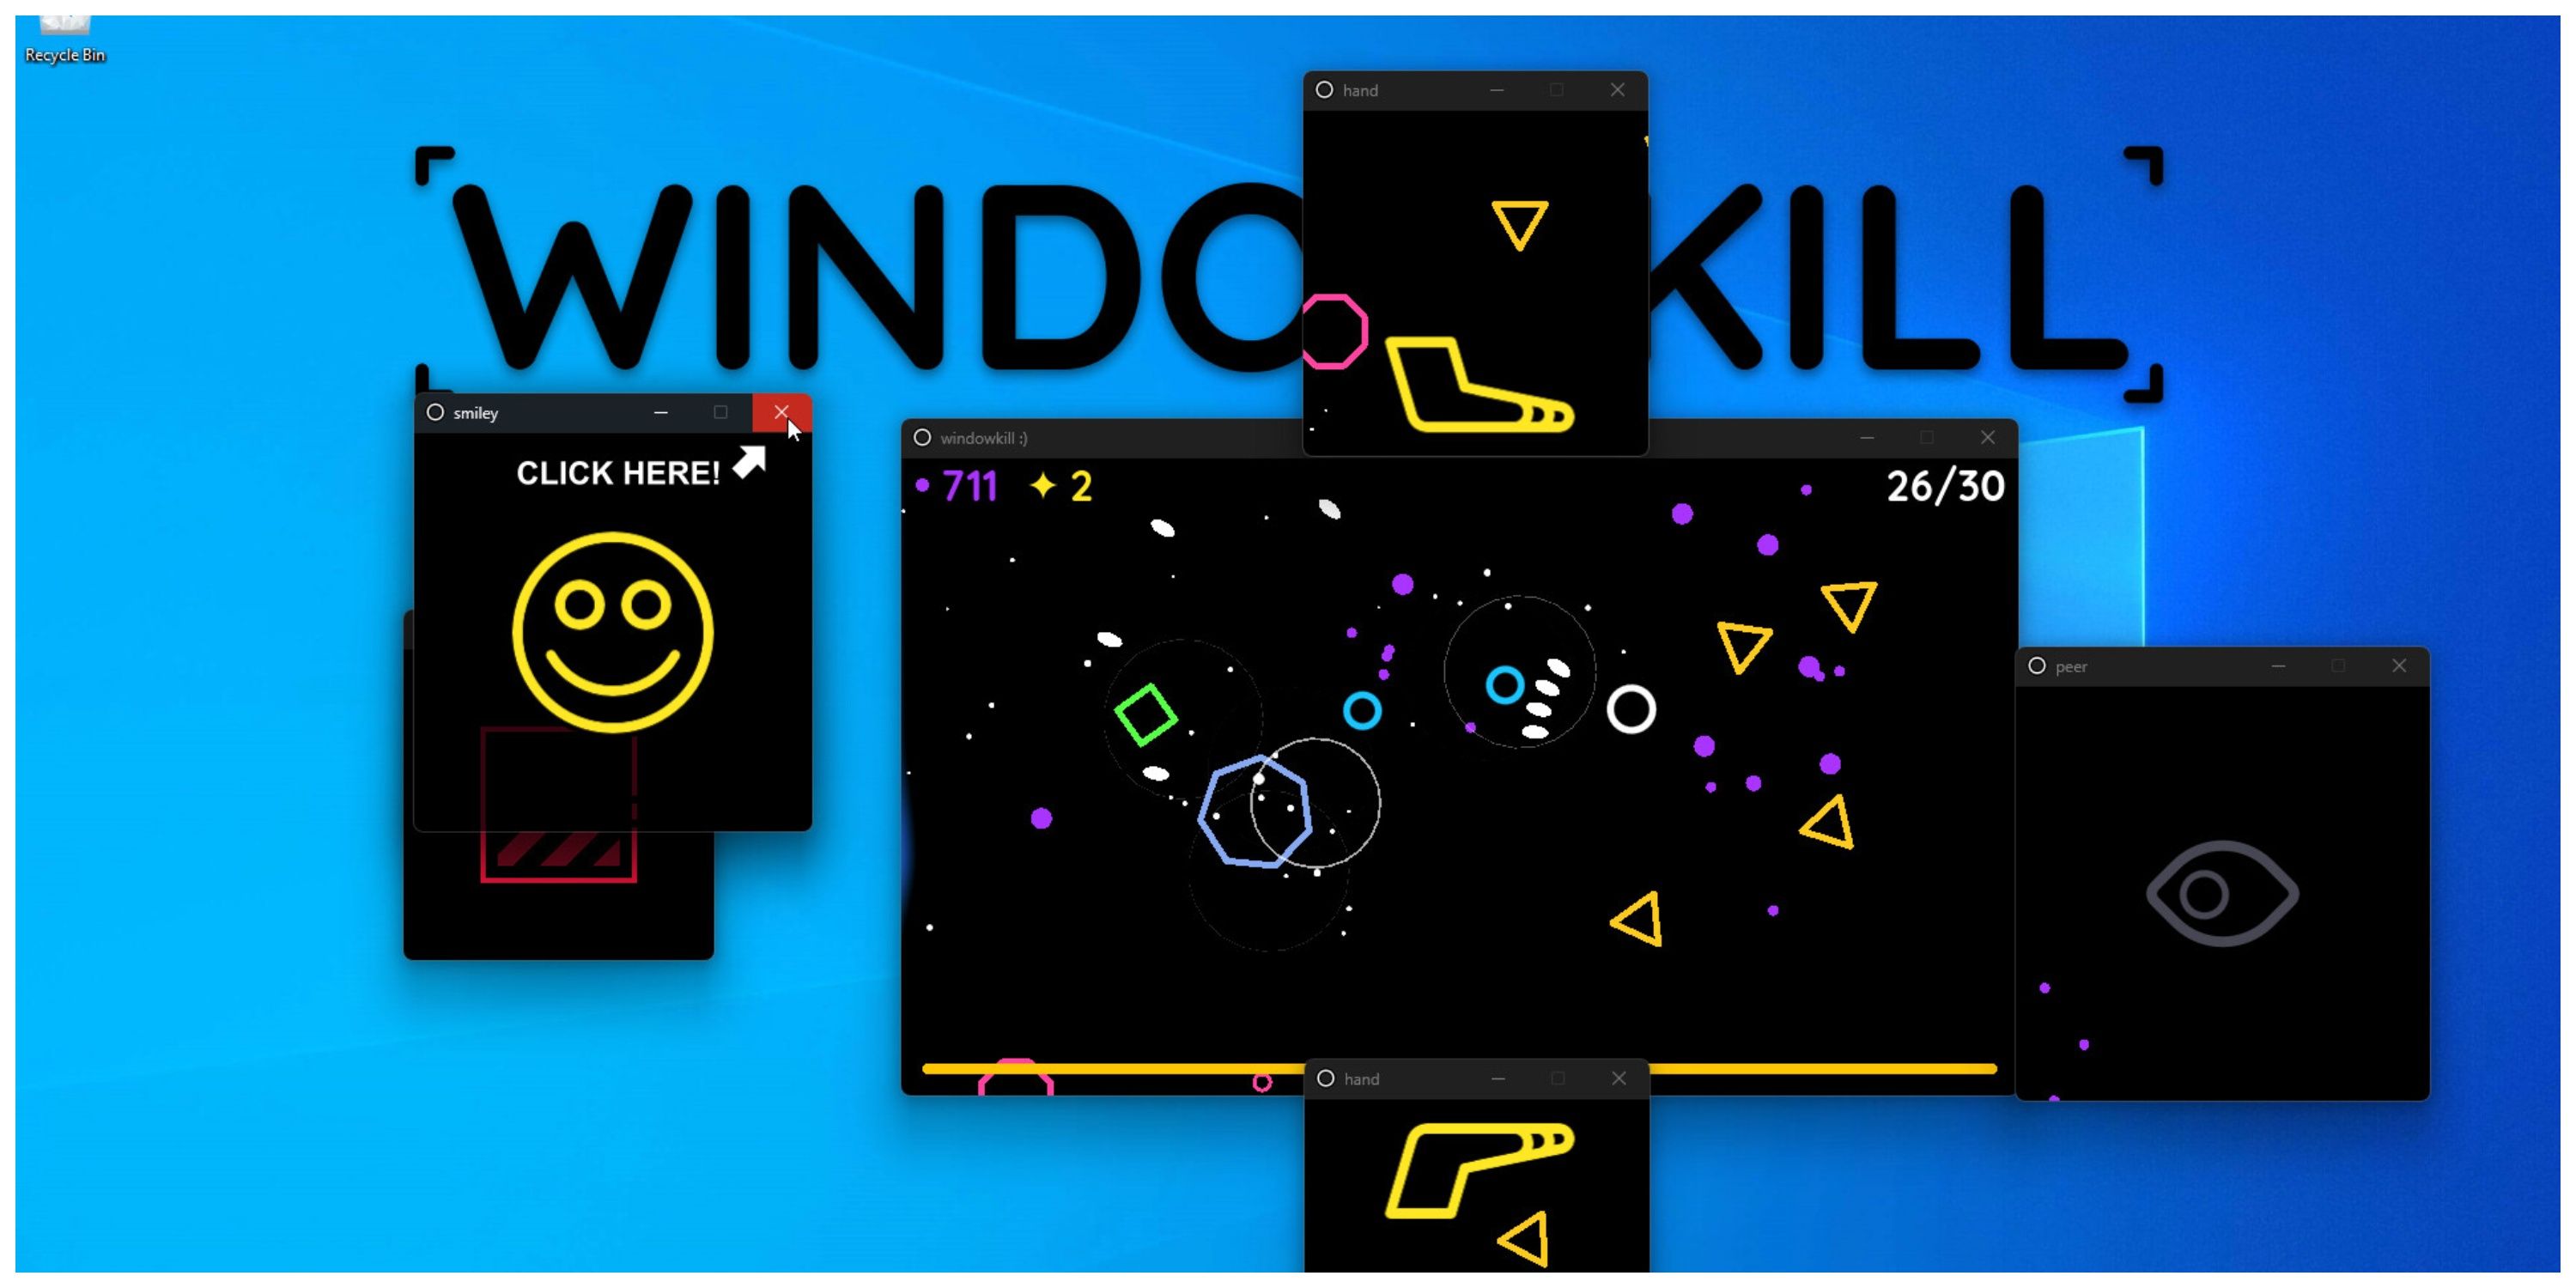 Several Windows In Action In Windowkill 